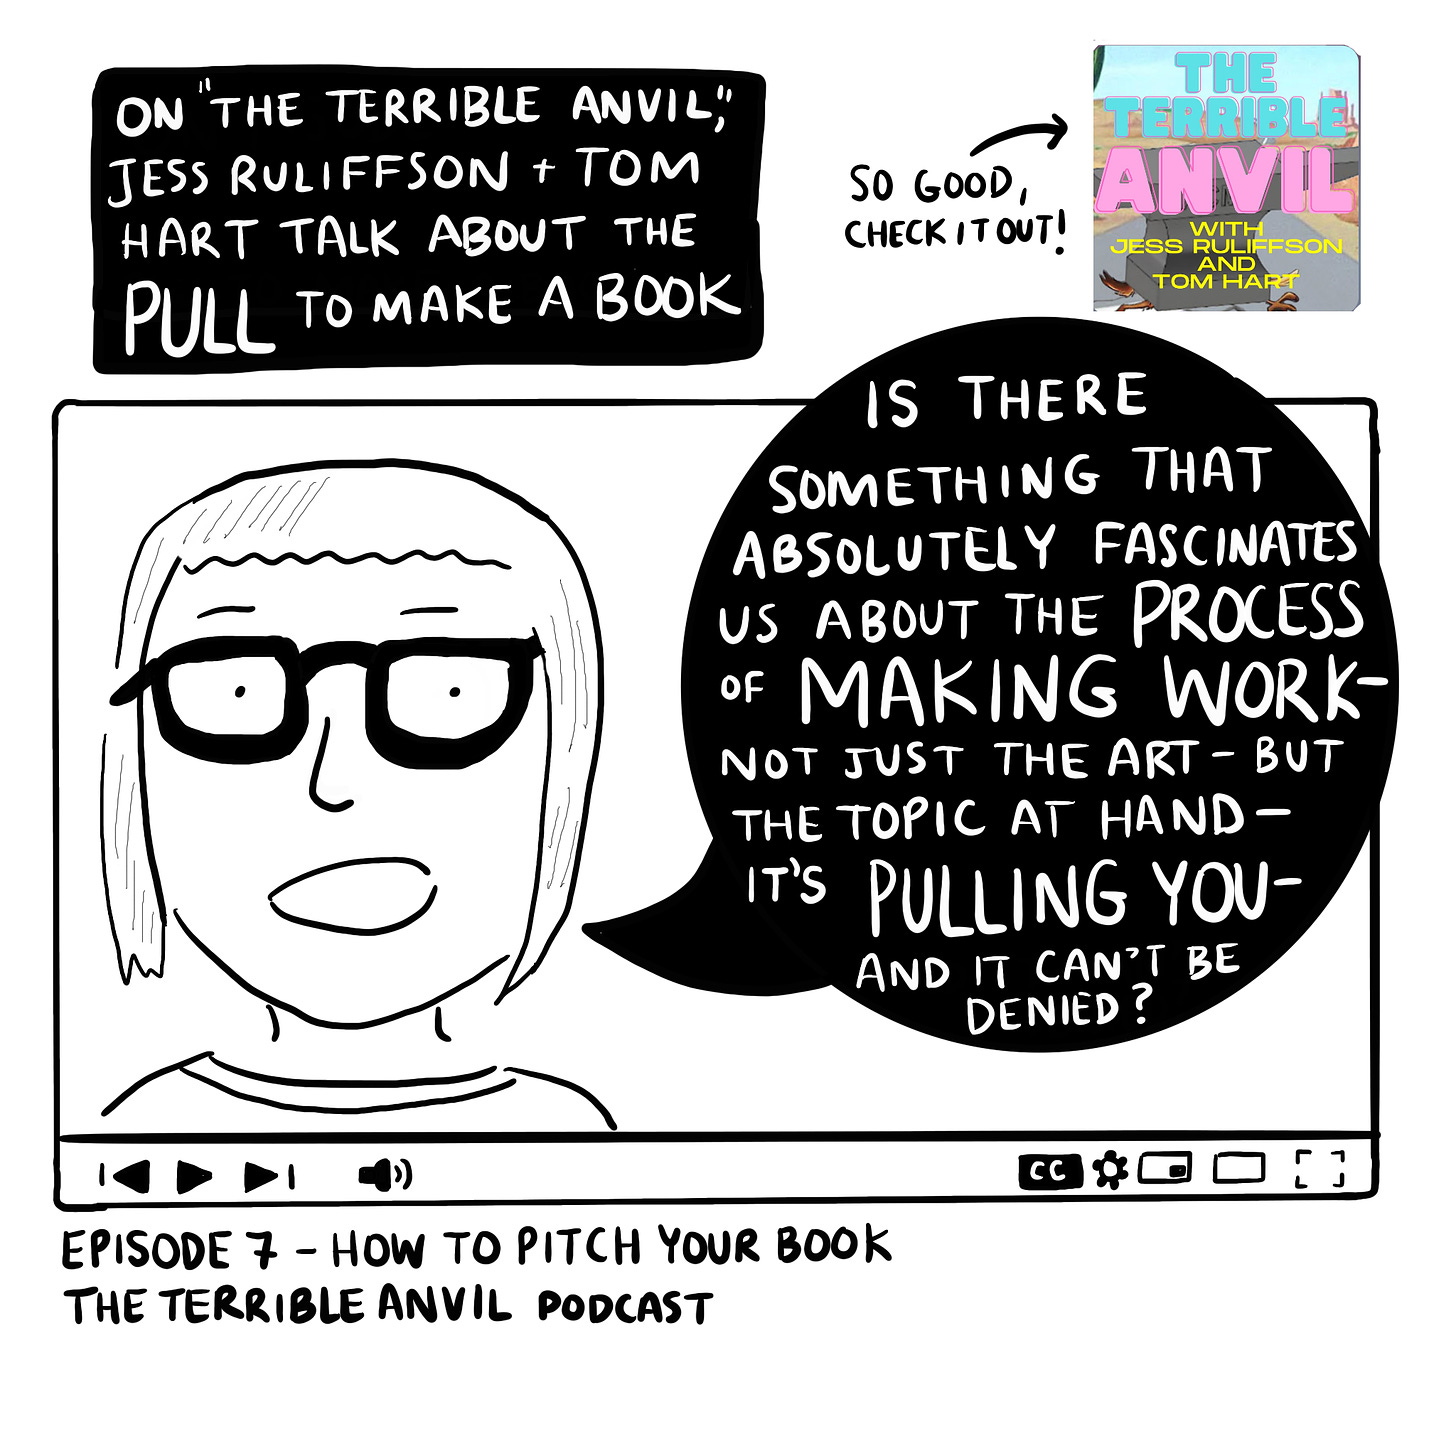 On the Terrible Anvil, Jess Ruliffson & Tom Hart talk about the pull to make a book. Image of Jess in a youtube screen saying “Is there something that absolutely fascinates us about the process of making work—not just the art—but the topic at hand—it’s pulling you—and it can’t be denied? Image of the Terrible Anvil podcast with an arrow saying so good check it out. 